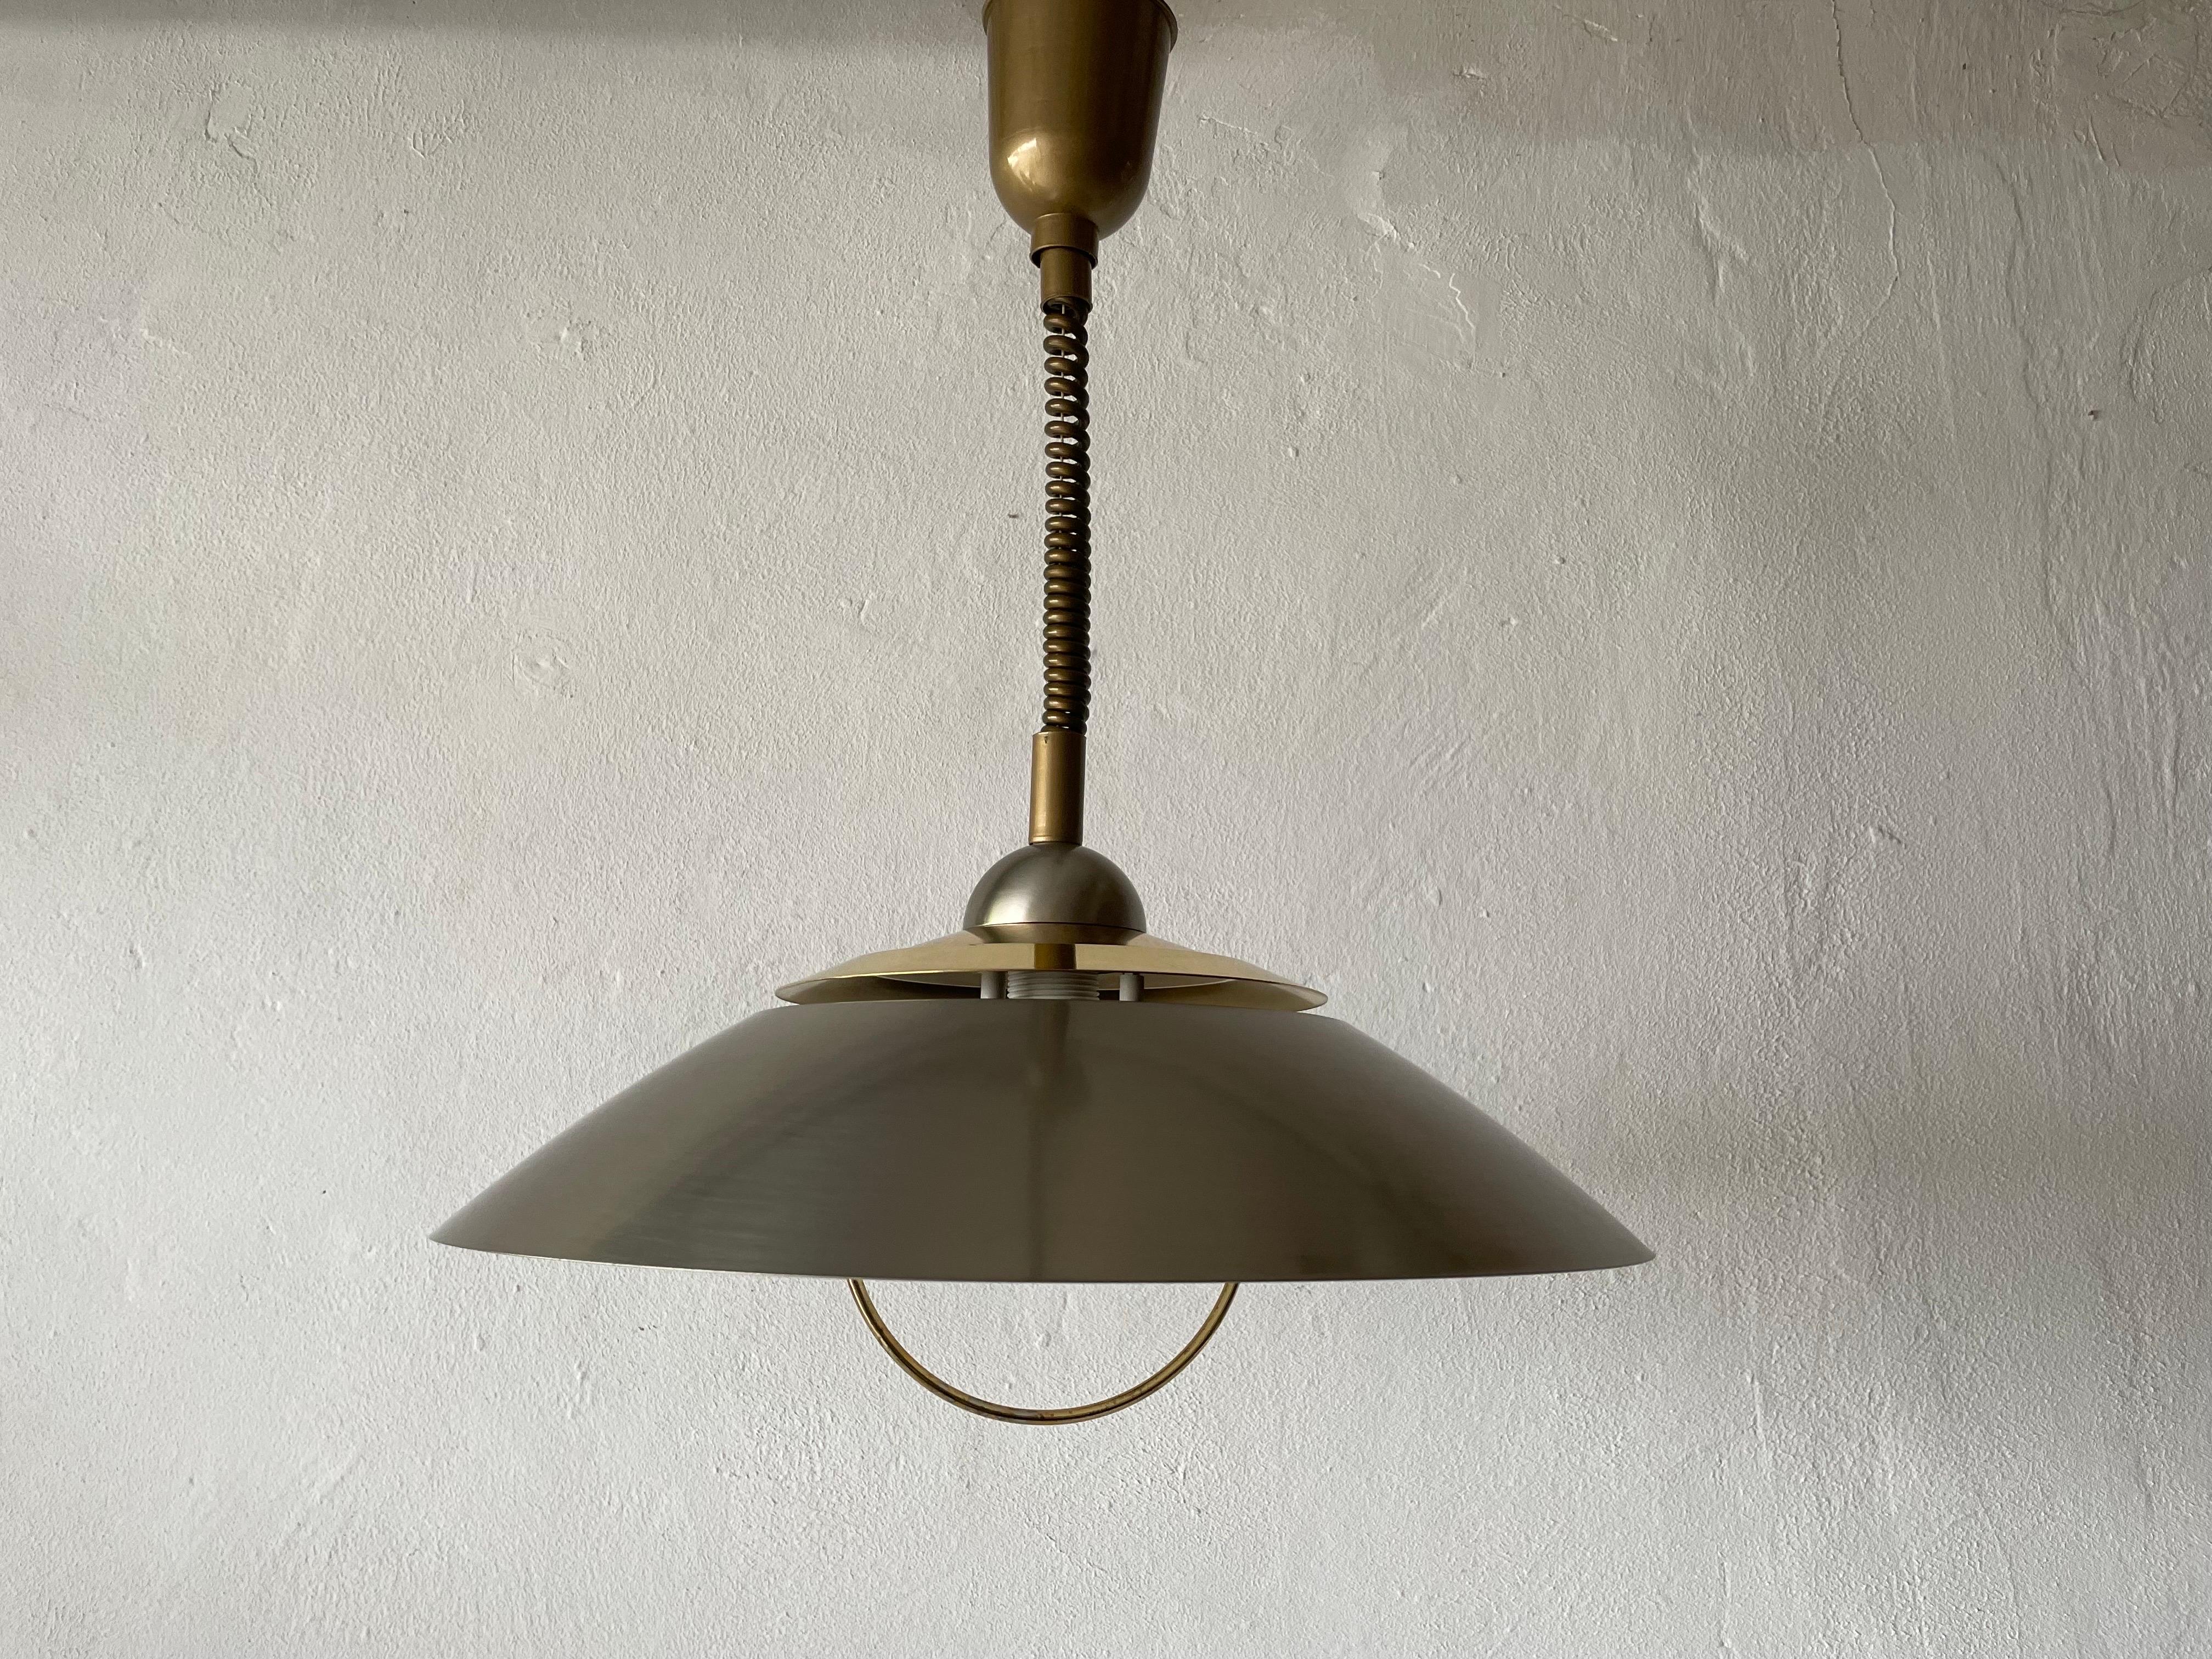 Chrome and Gold Metal Pendant Lamp by TZ, 1970s, Germany For Sale 1